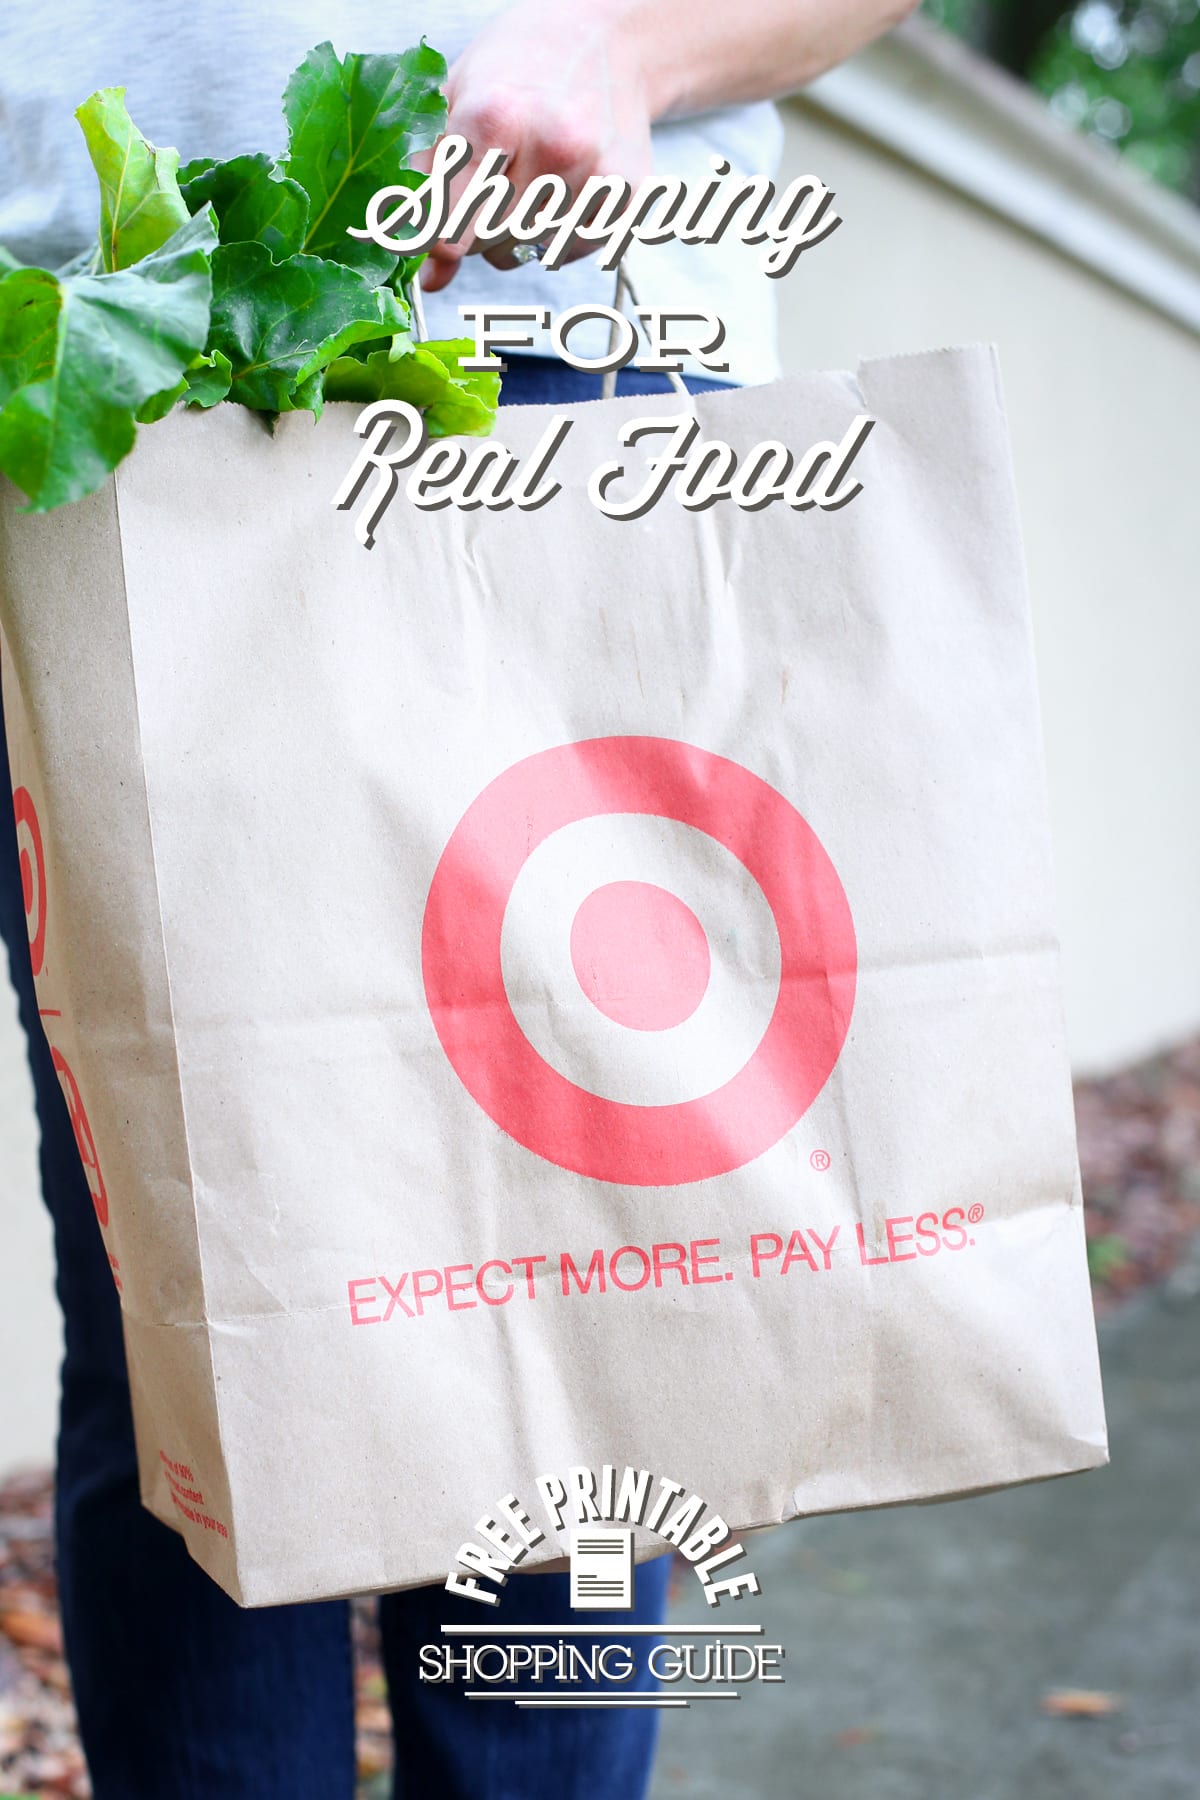 Shopping for Real Food at Target: My Top Picks + Printable Shopping Guide